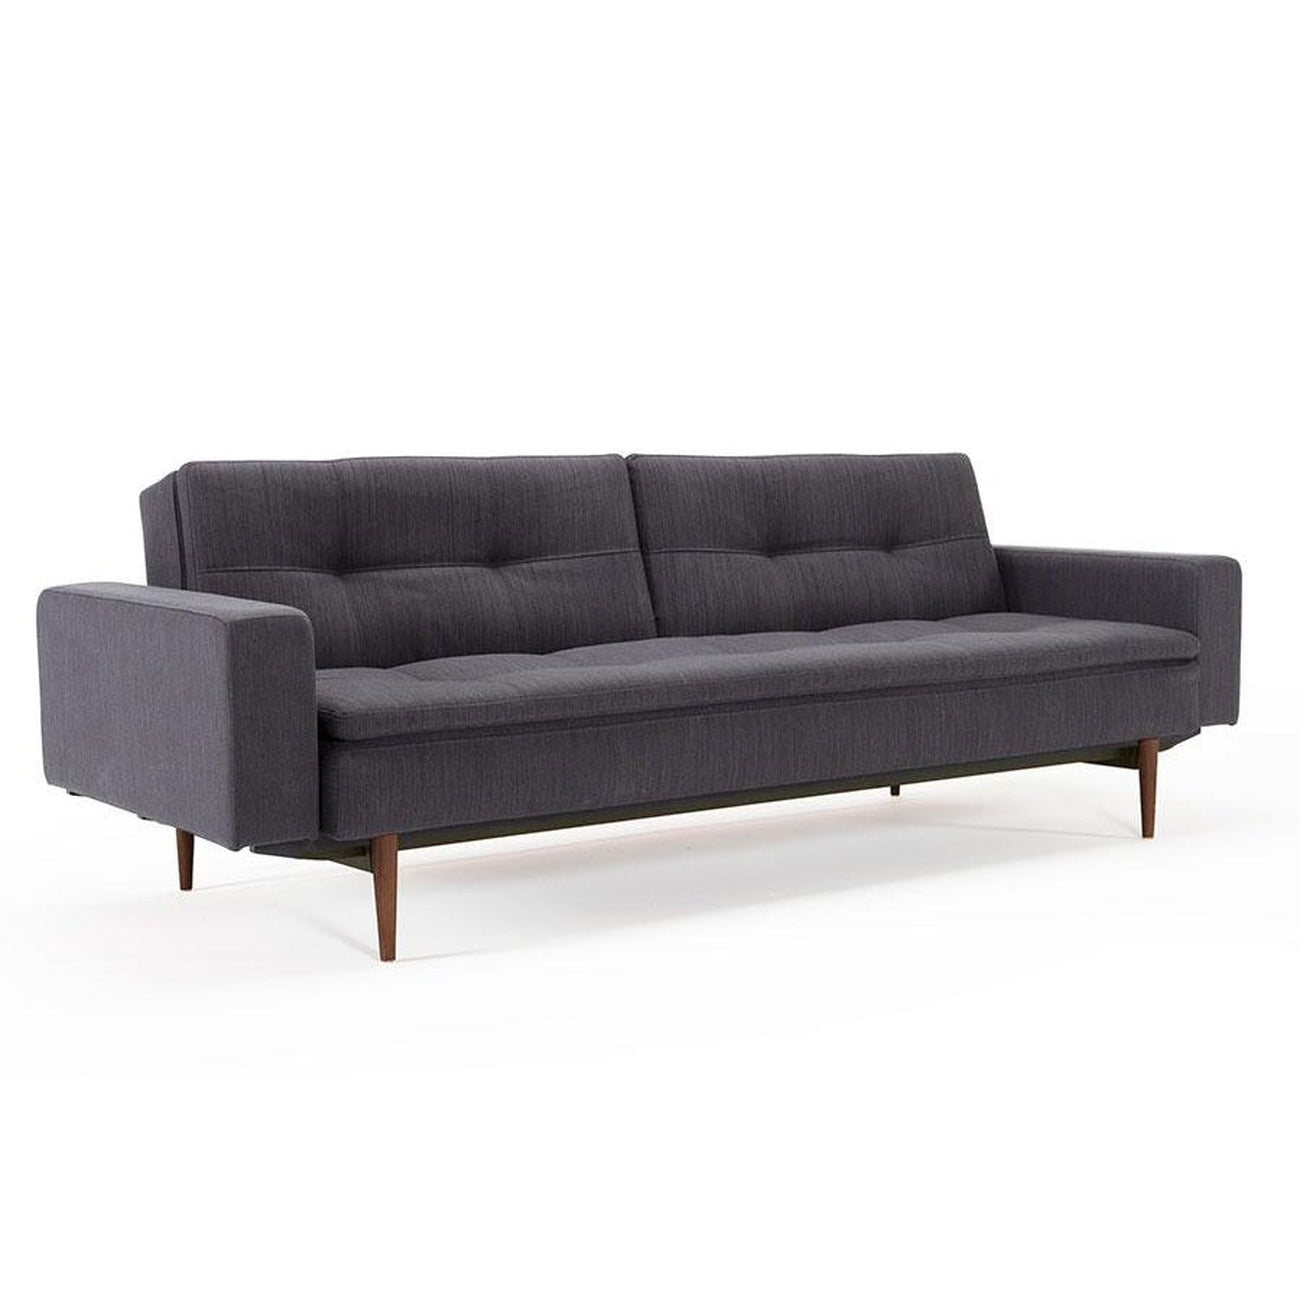 Dublexo Deluxe Sofa W/Arms,DARK WOOD-Innovation Living-INNO-94-741050020509-10-3-SofasElegance Anthracite-7-France and Son